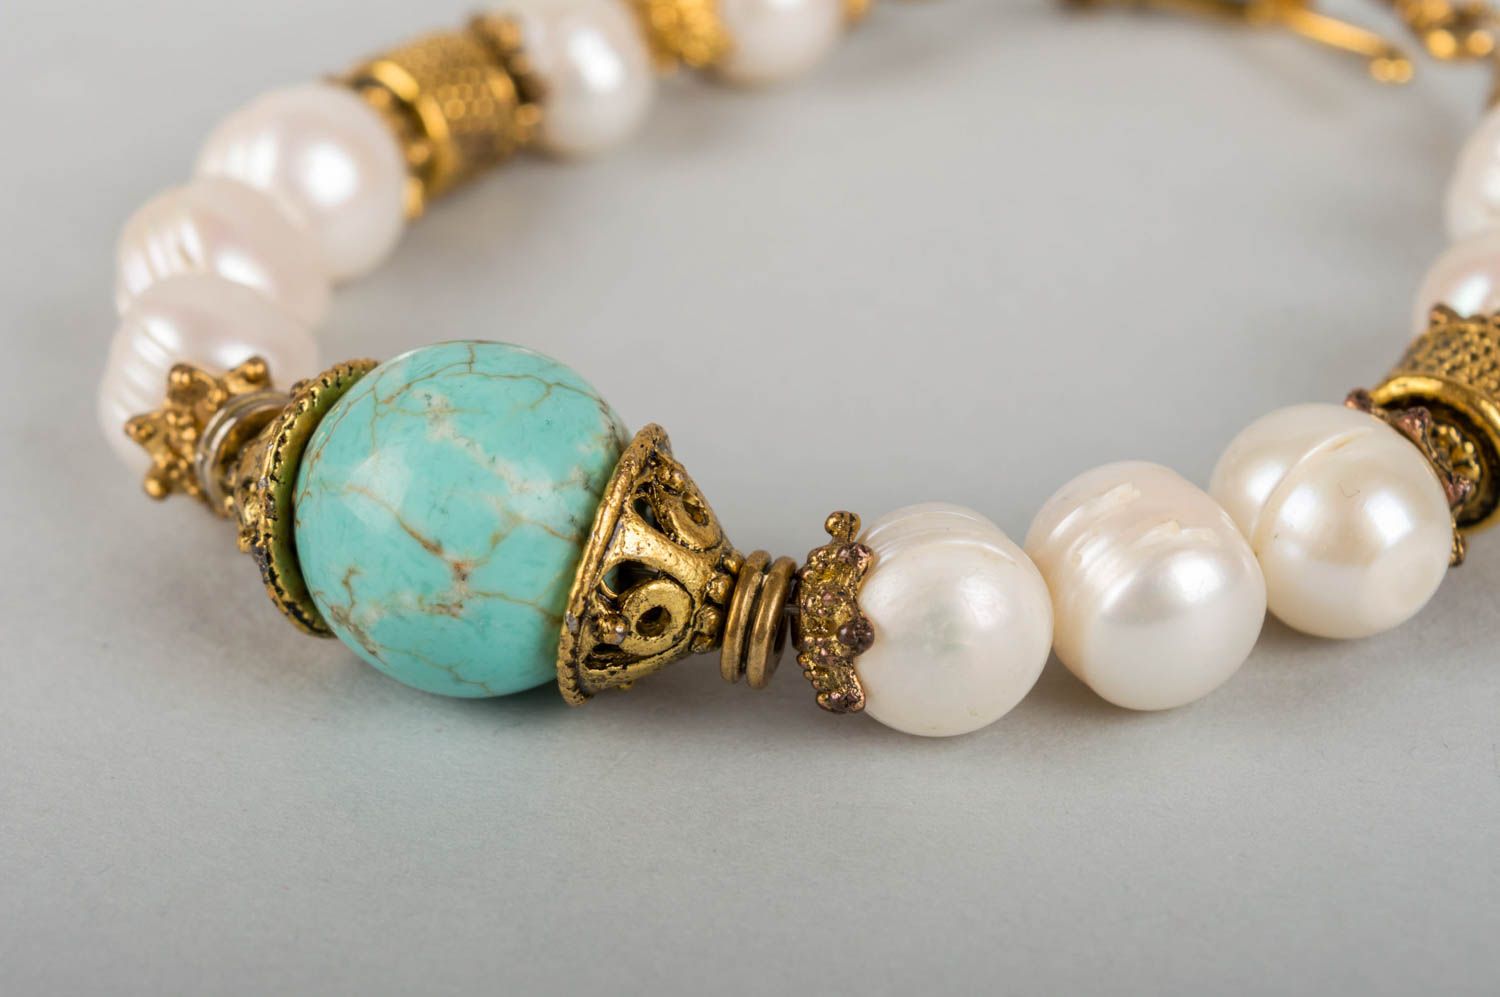 Handmade magnificent tender wrist bracelet with pearls and turquoise stone beads photo 4